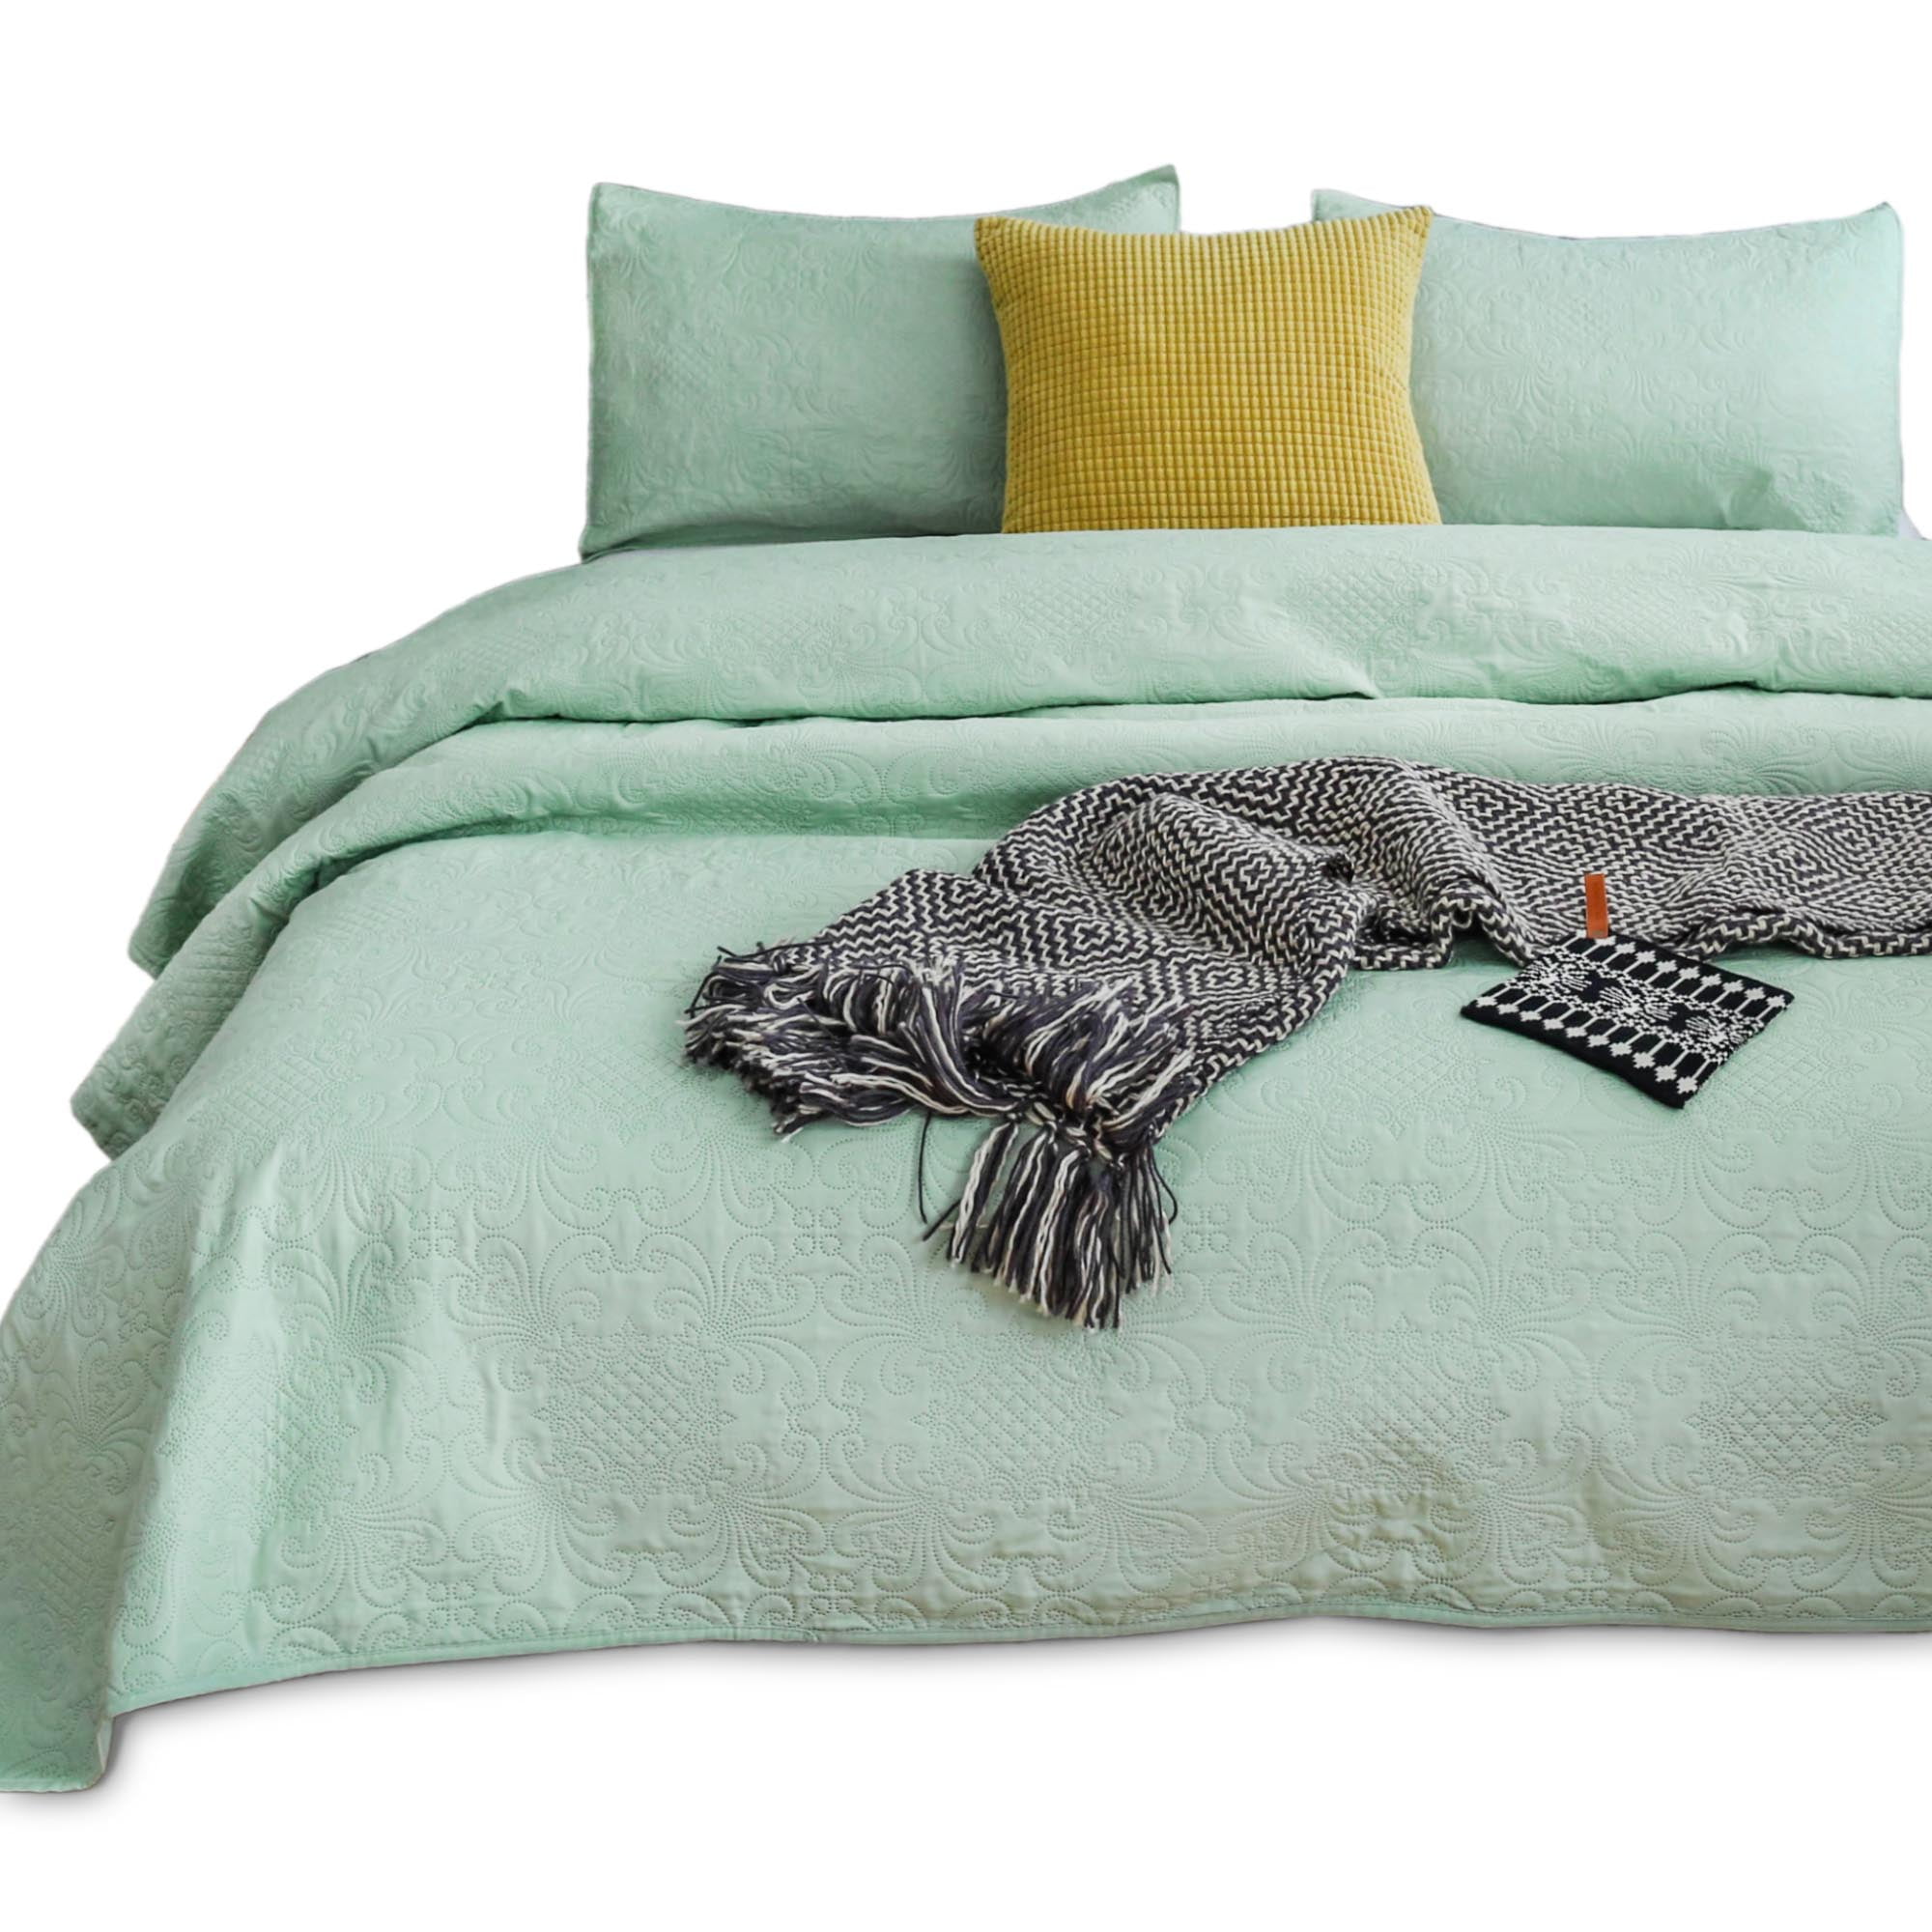 Details about   Comfort Spaces Kienna Quilt Coverlet Bedspread Ultra Soft Hypoallergenic All Sea 